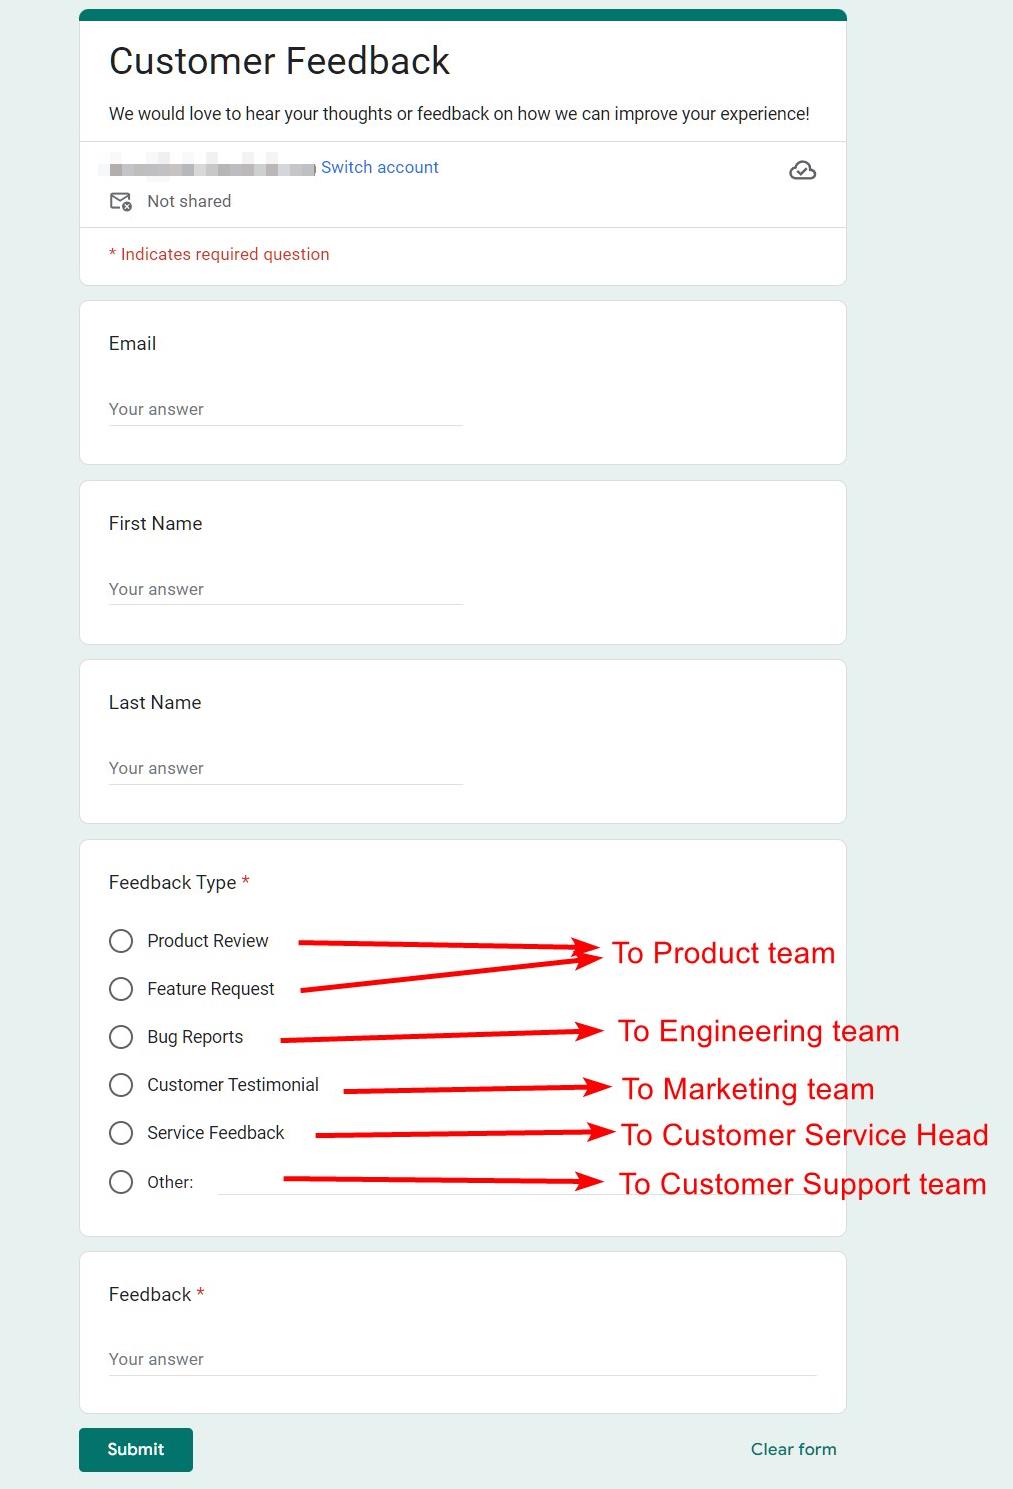 A sample Google Form to collect customer feedback on different types